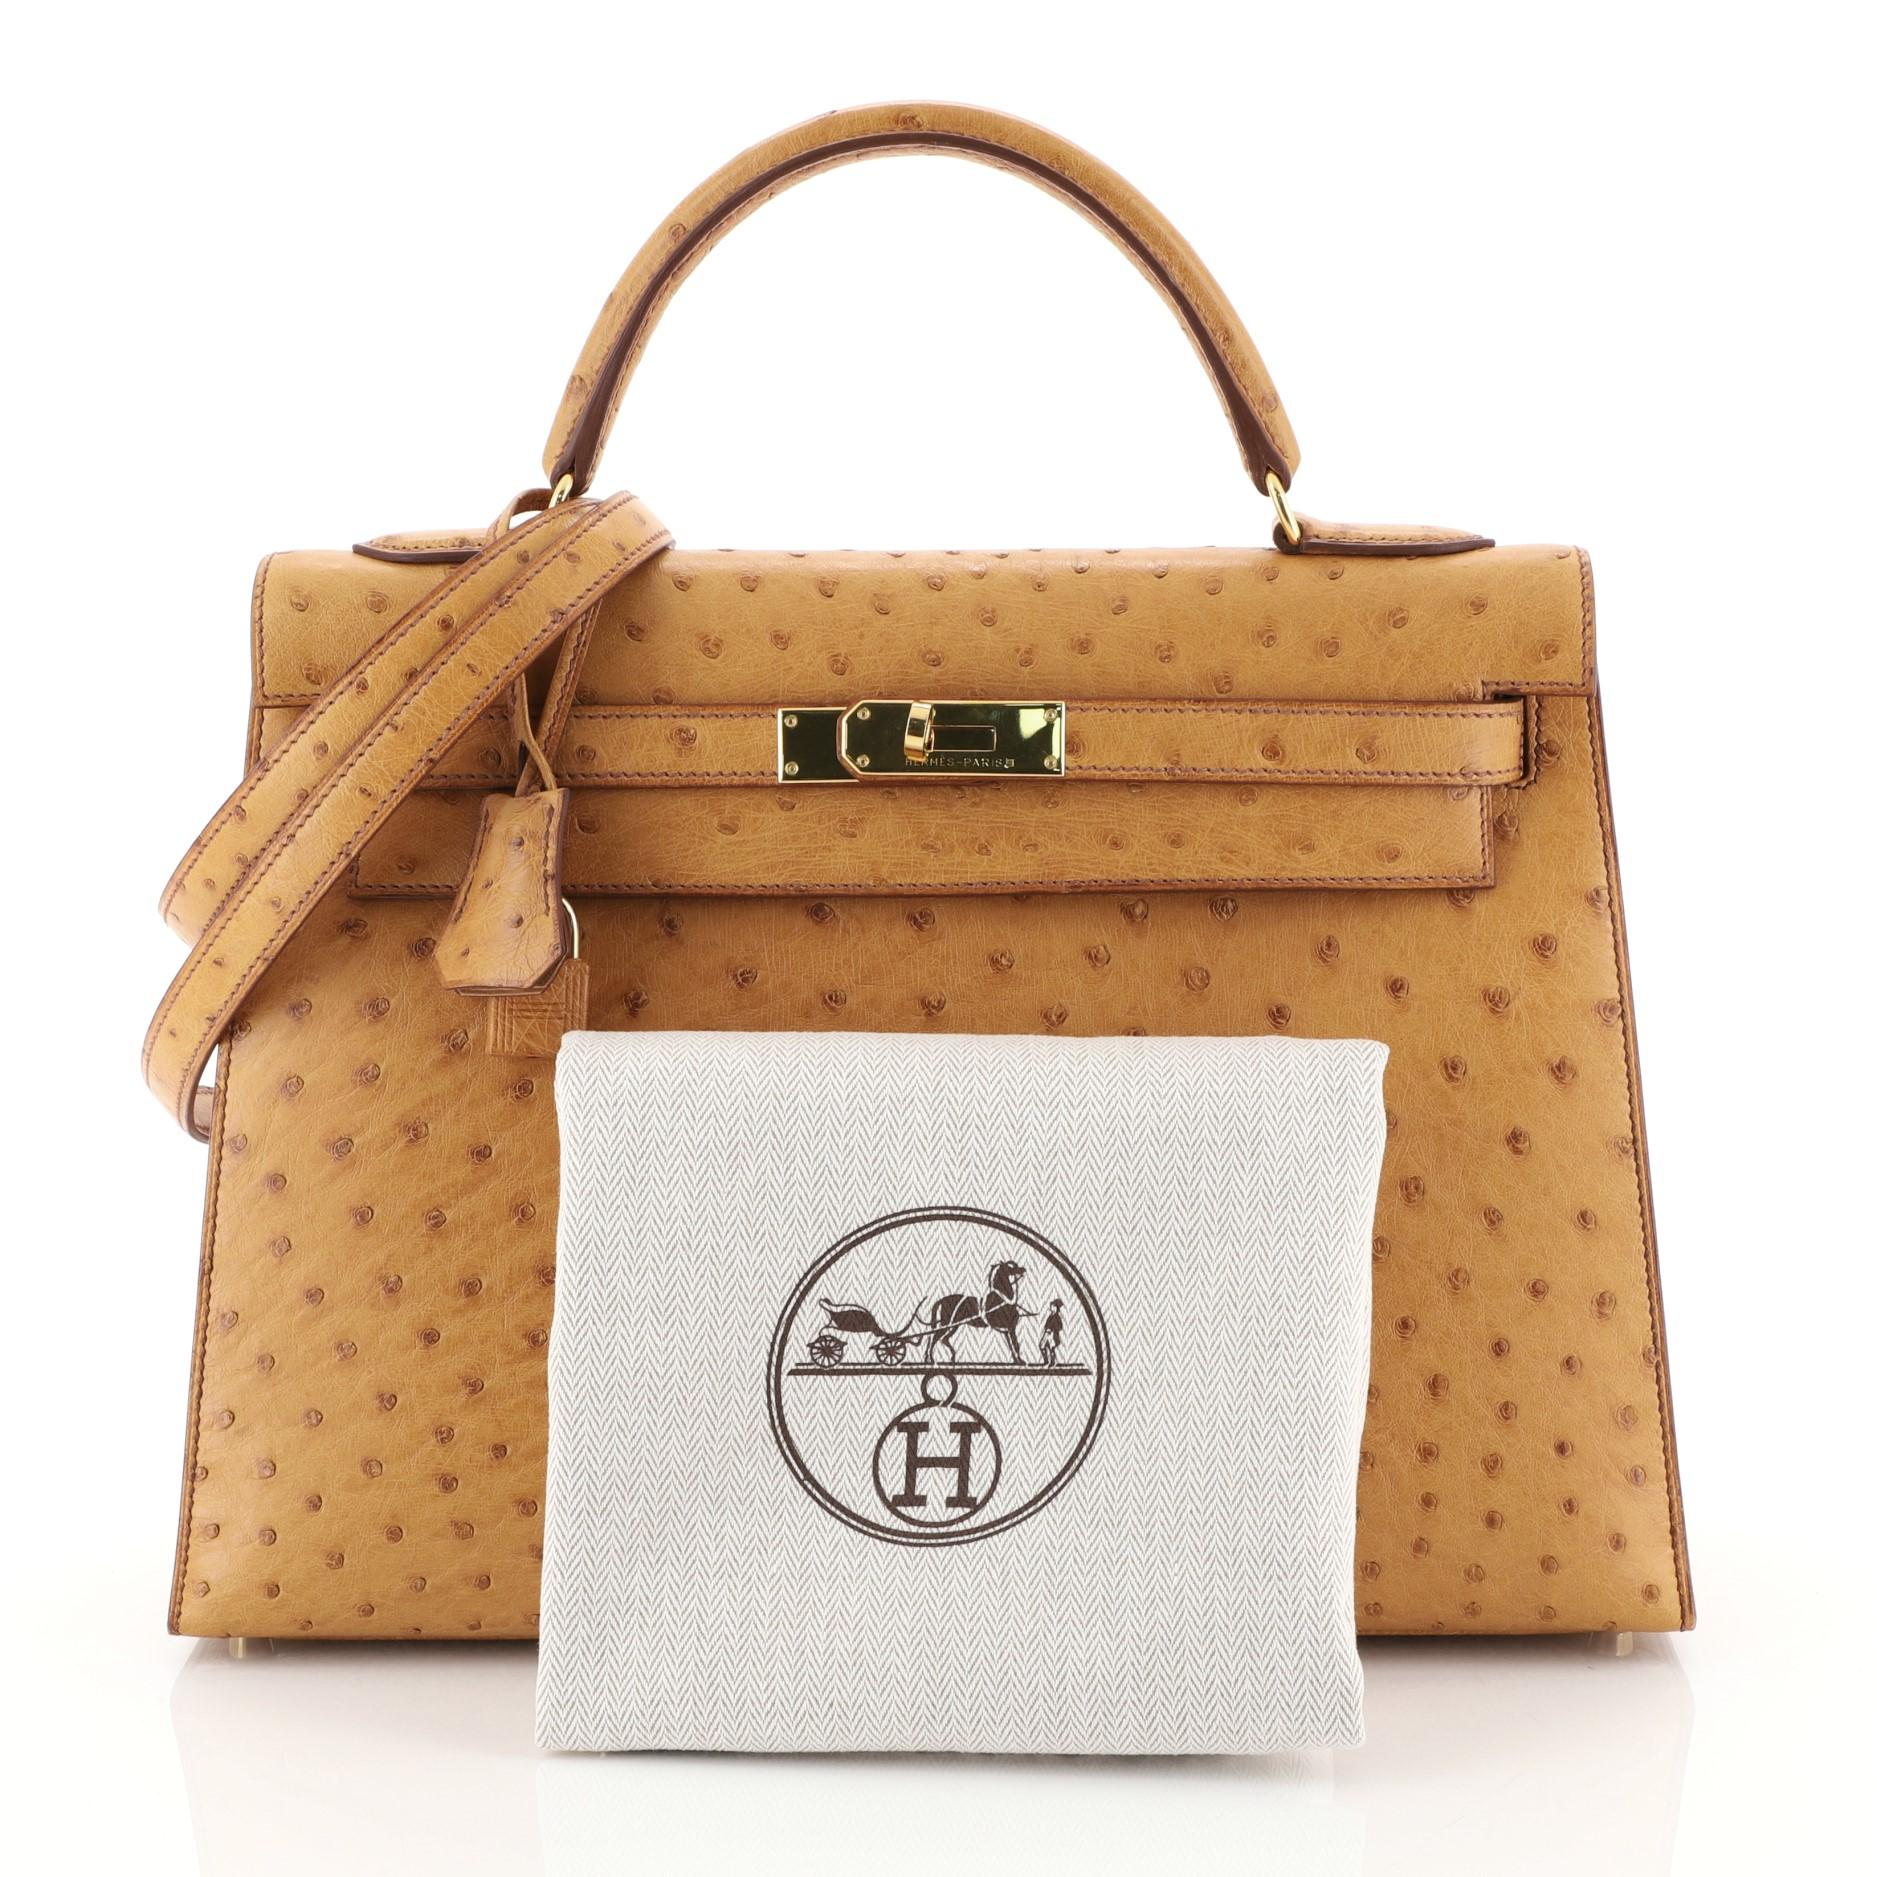 This Hermes Kelly Handbag Natural Ostrich with Gold Hardware 32, crafted from genuine Natural brown Ostrich, features a top handle, frontal flap, and gold hardware. Its turn-lock closure opens to a Natural brown Chevre leather interior with zip and